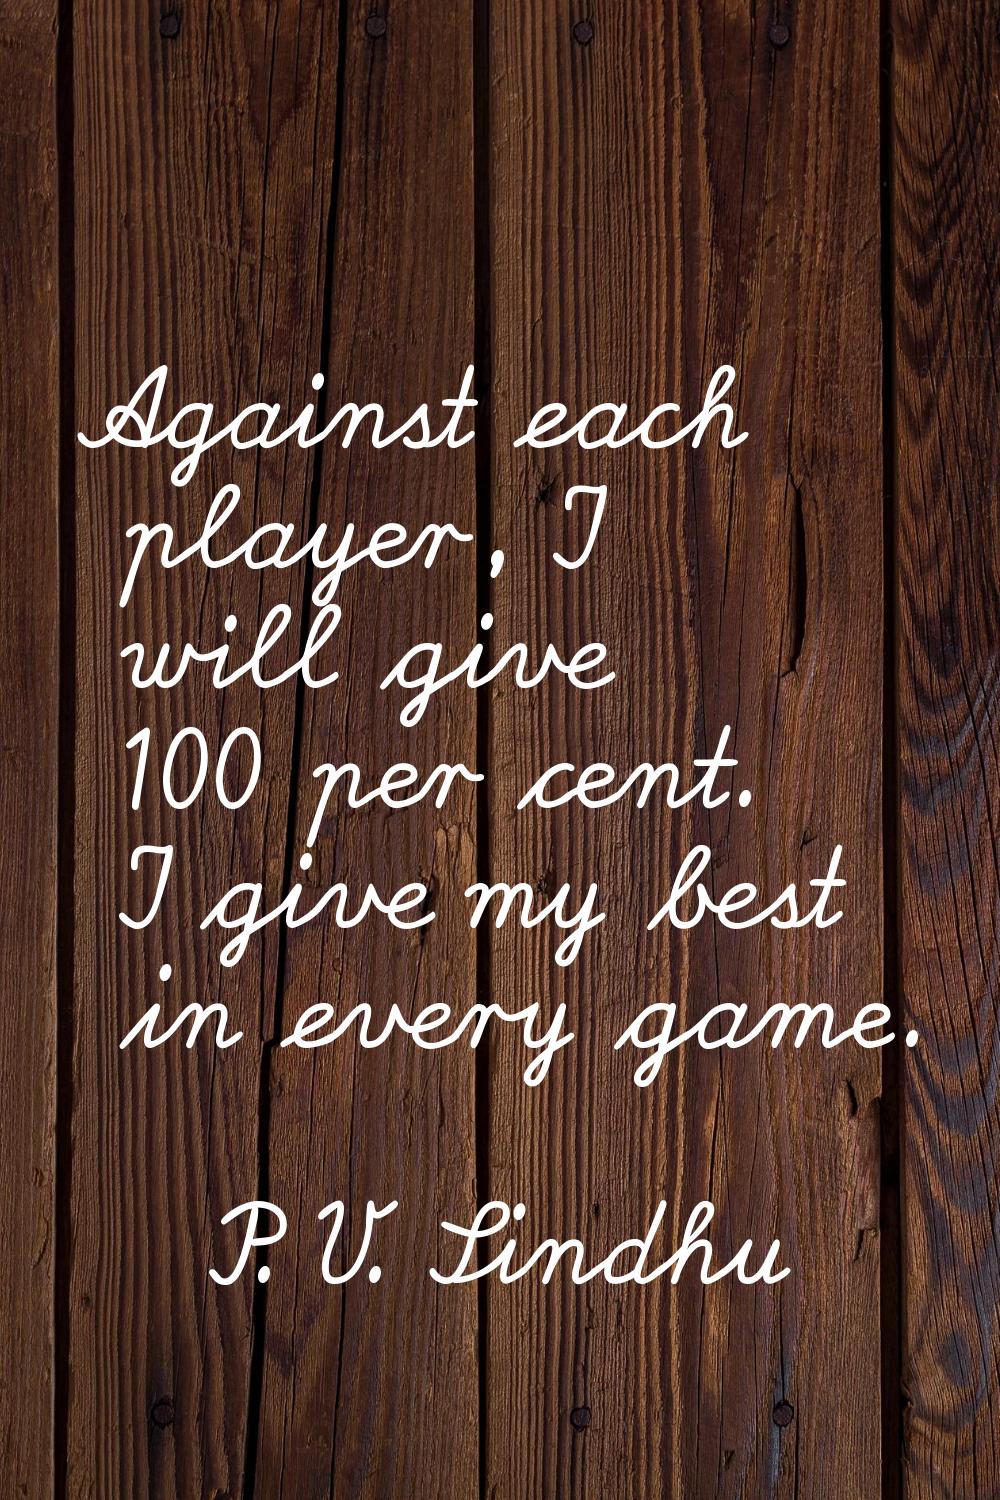 Against each player, I will give 100 per cent. I give my best in every game.